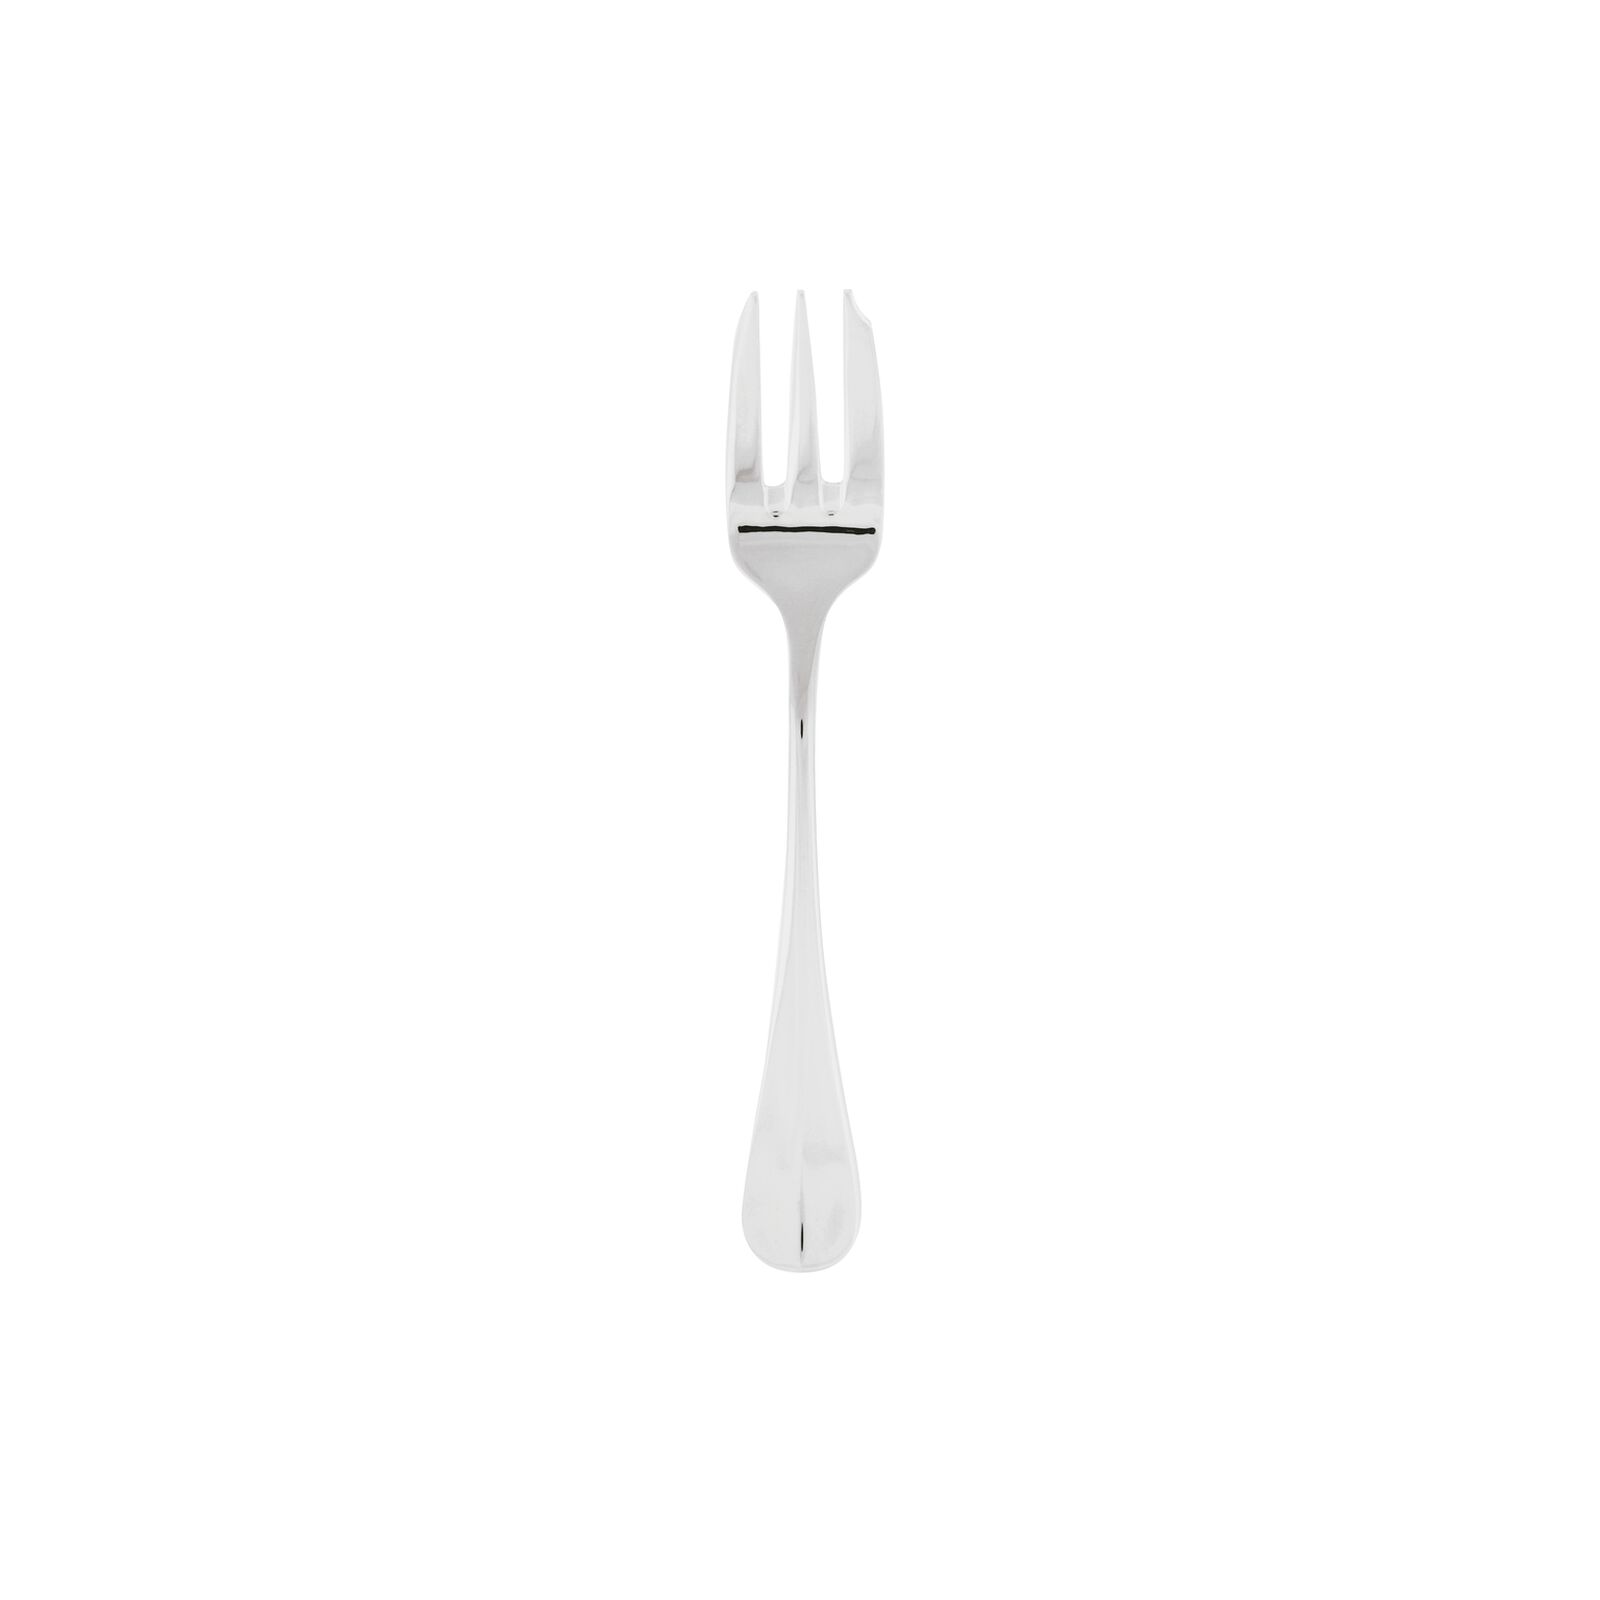 Cake Fork, Pastry Fork, Knife Edge Fork - Pearl White Disposable Fork, 3 Prong, 1 Prong with A Knife Edge - Perfect for Serving Cakes - 4 - Plastic